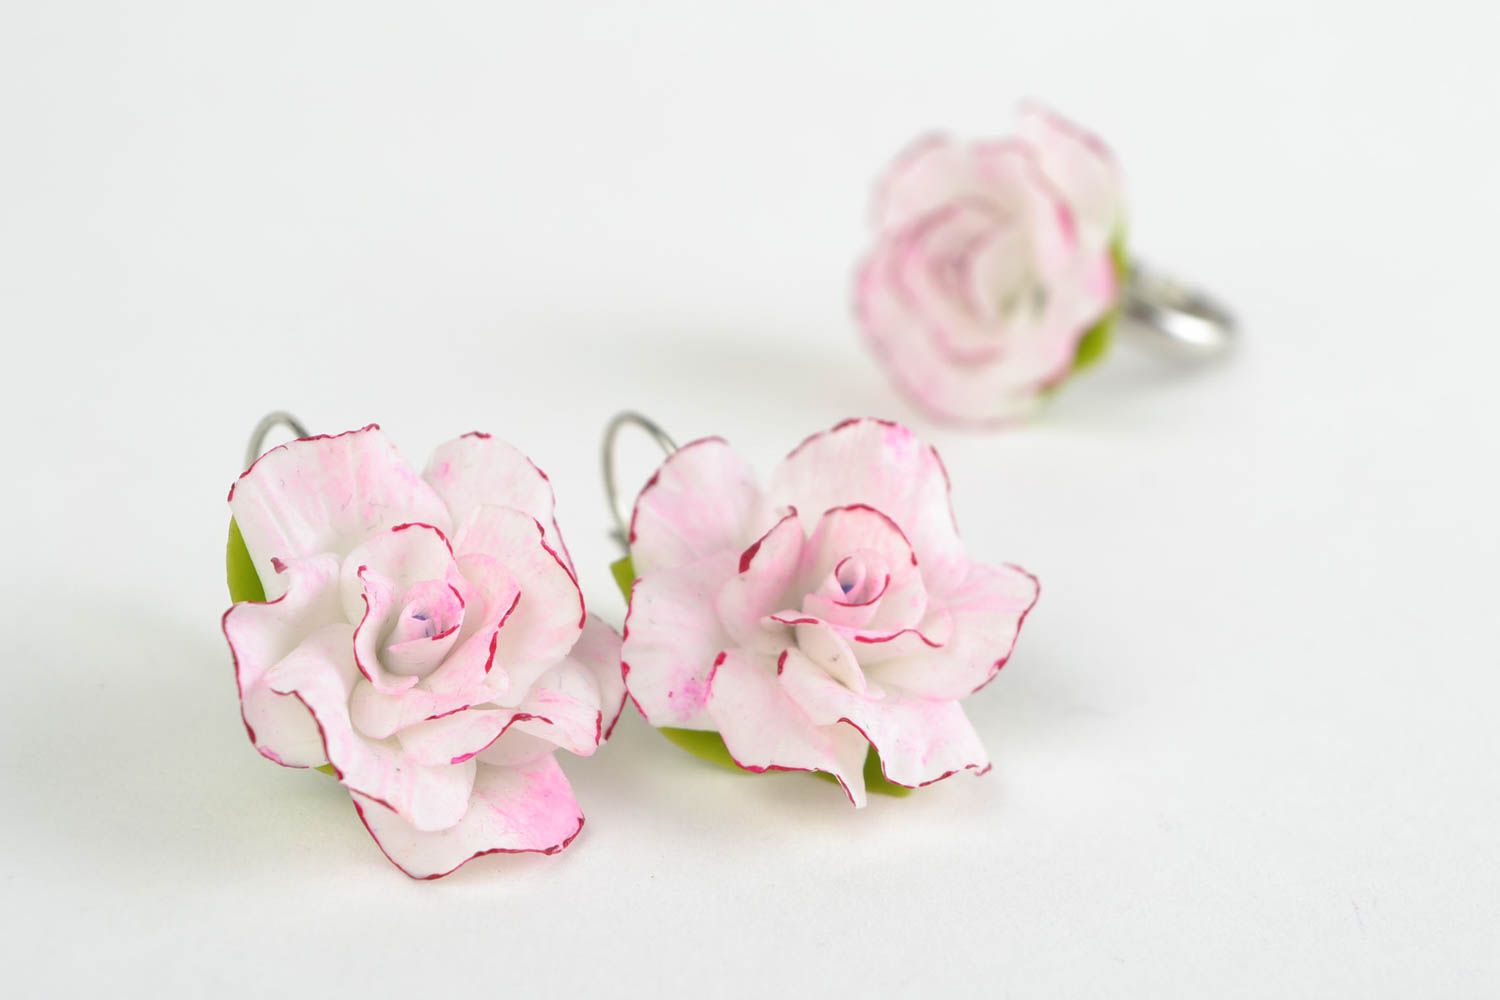 Gentle pink handmade cold porcelain flower jewelry set 2 items earrings and ring photo 4